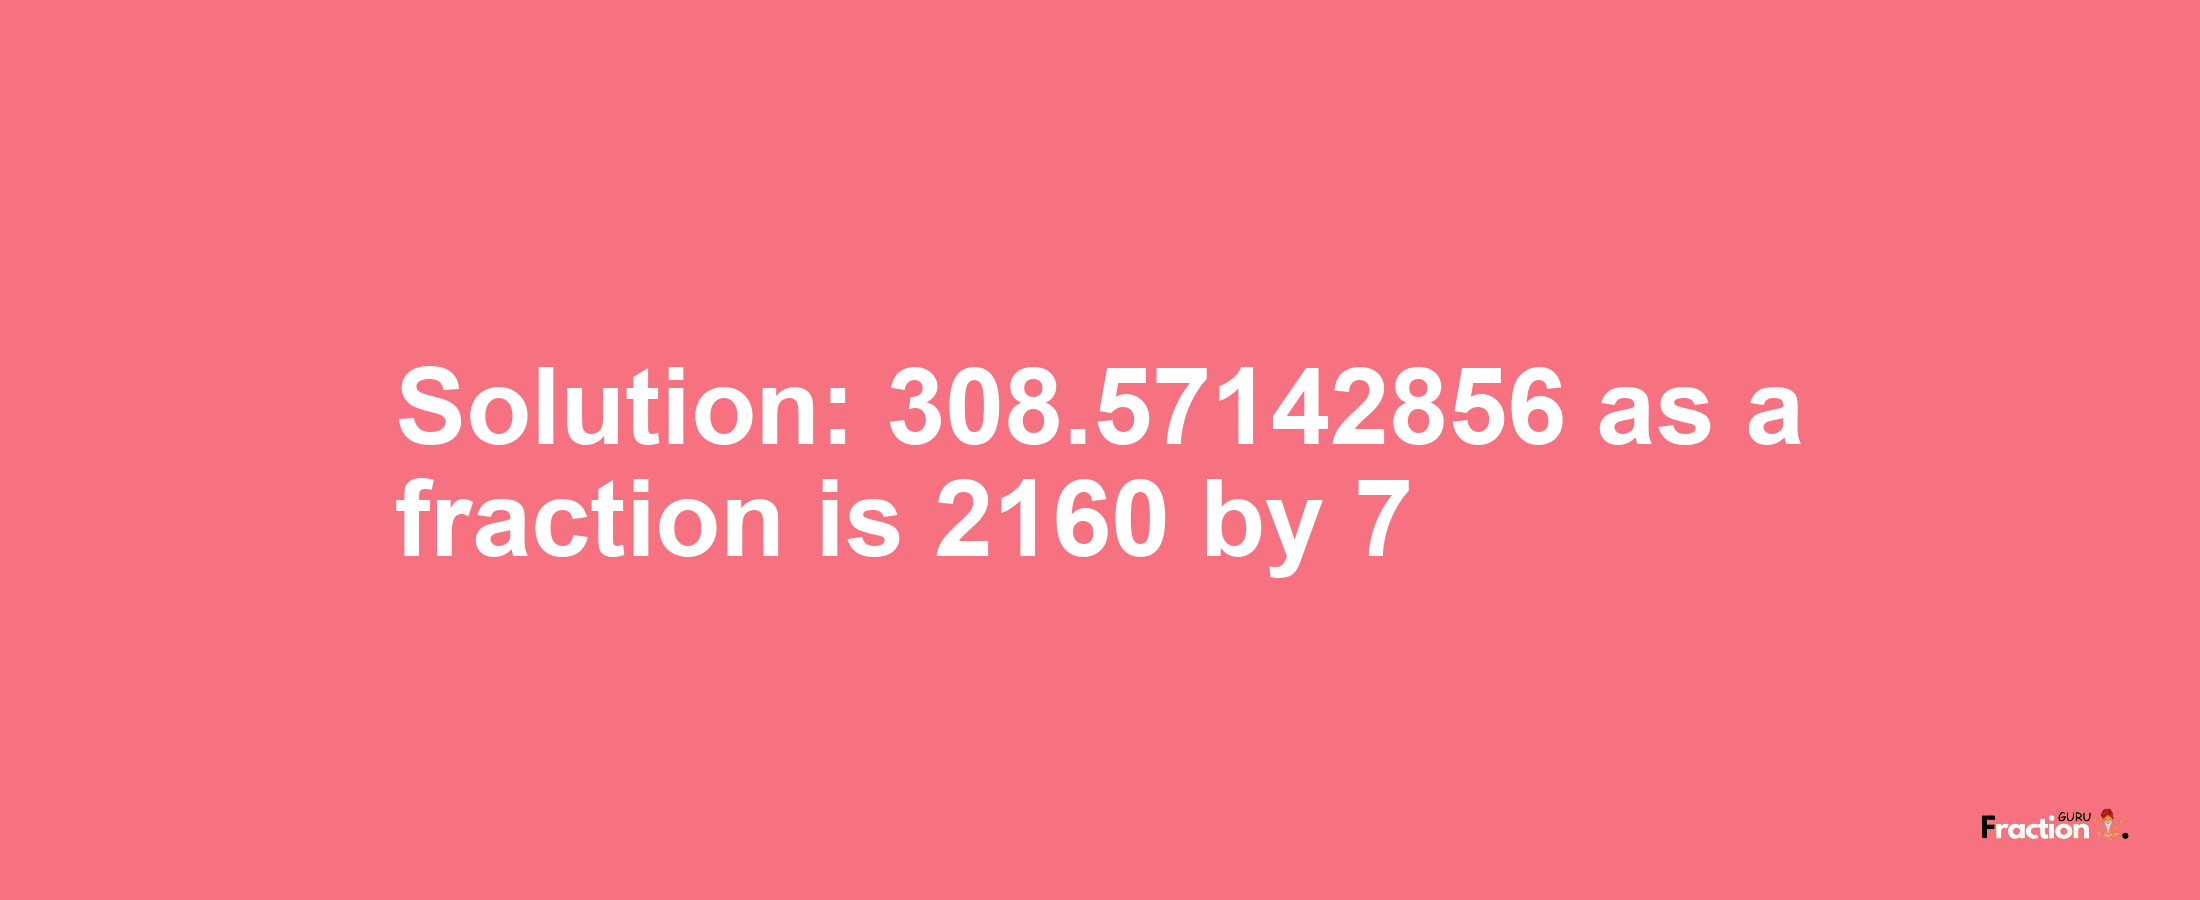 Solution:308.57142856 as a fraction is 2160/7